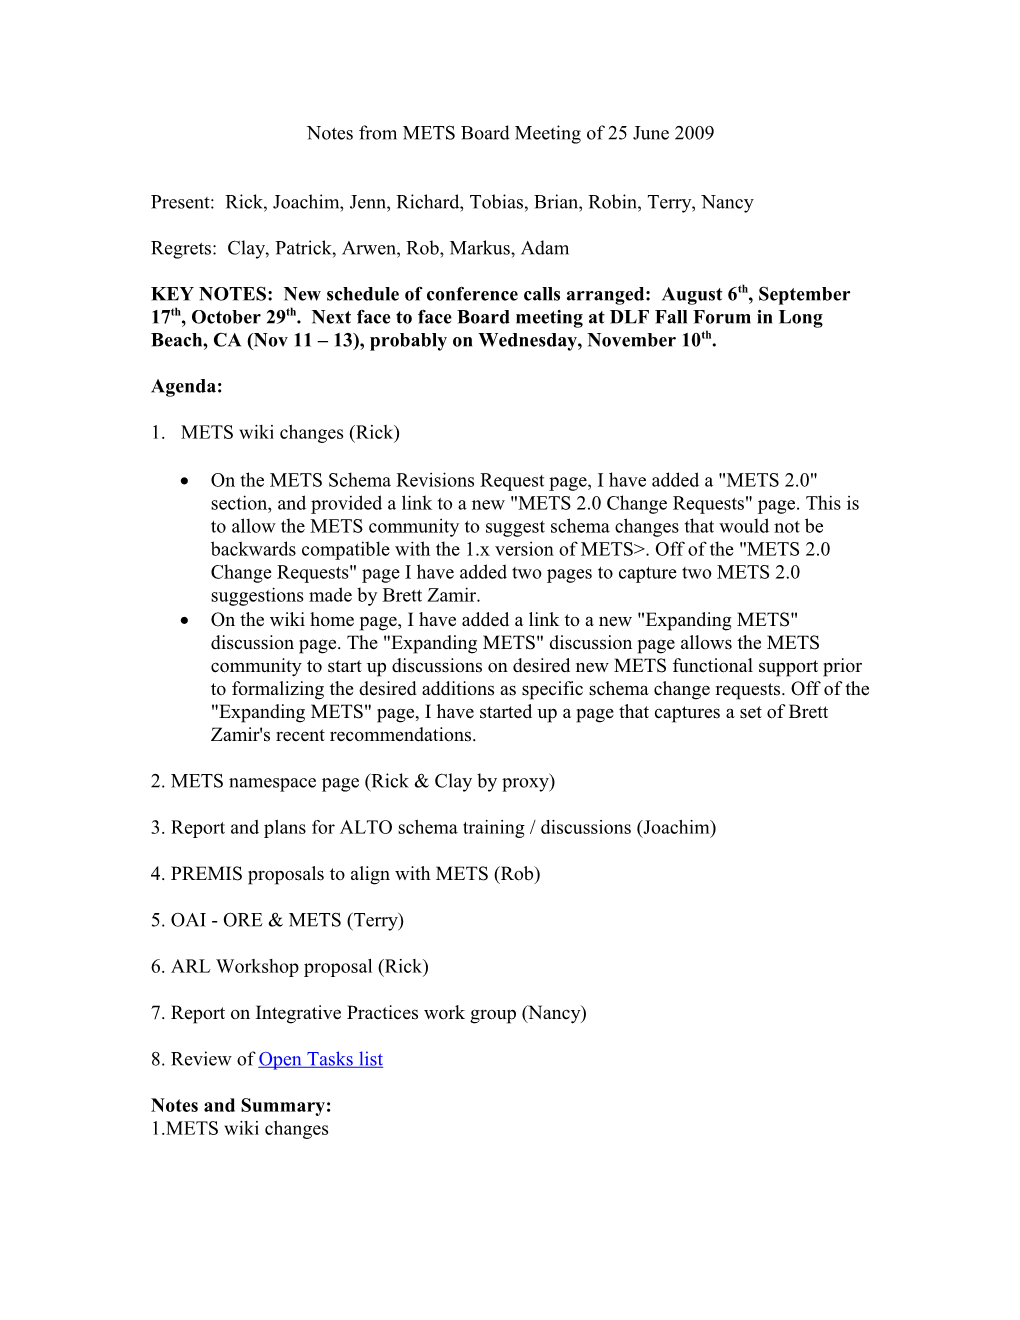 Notes from METS Board Meeting of 25 June 2009